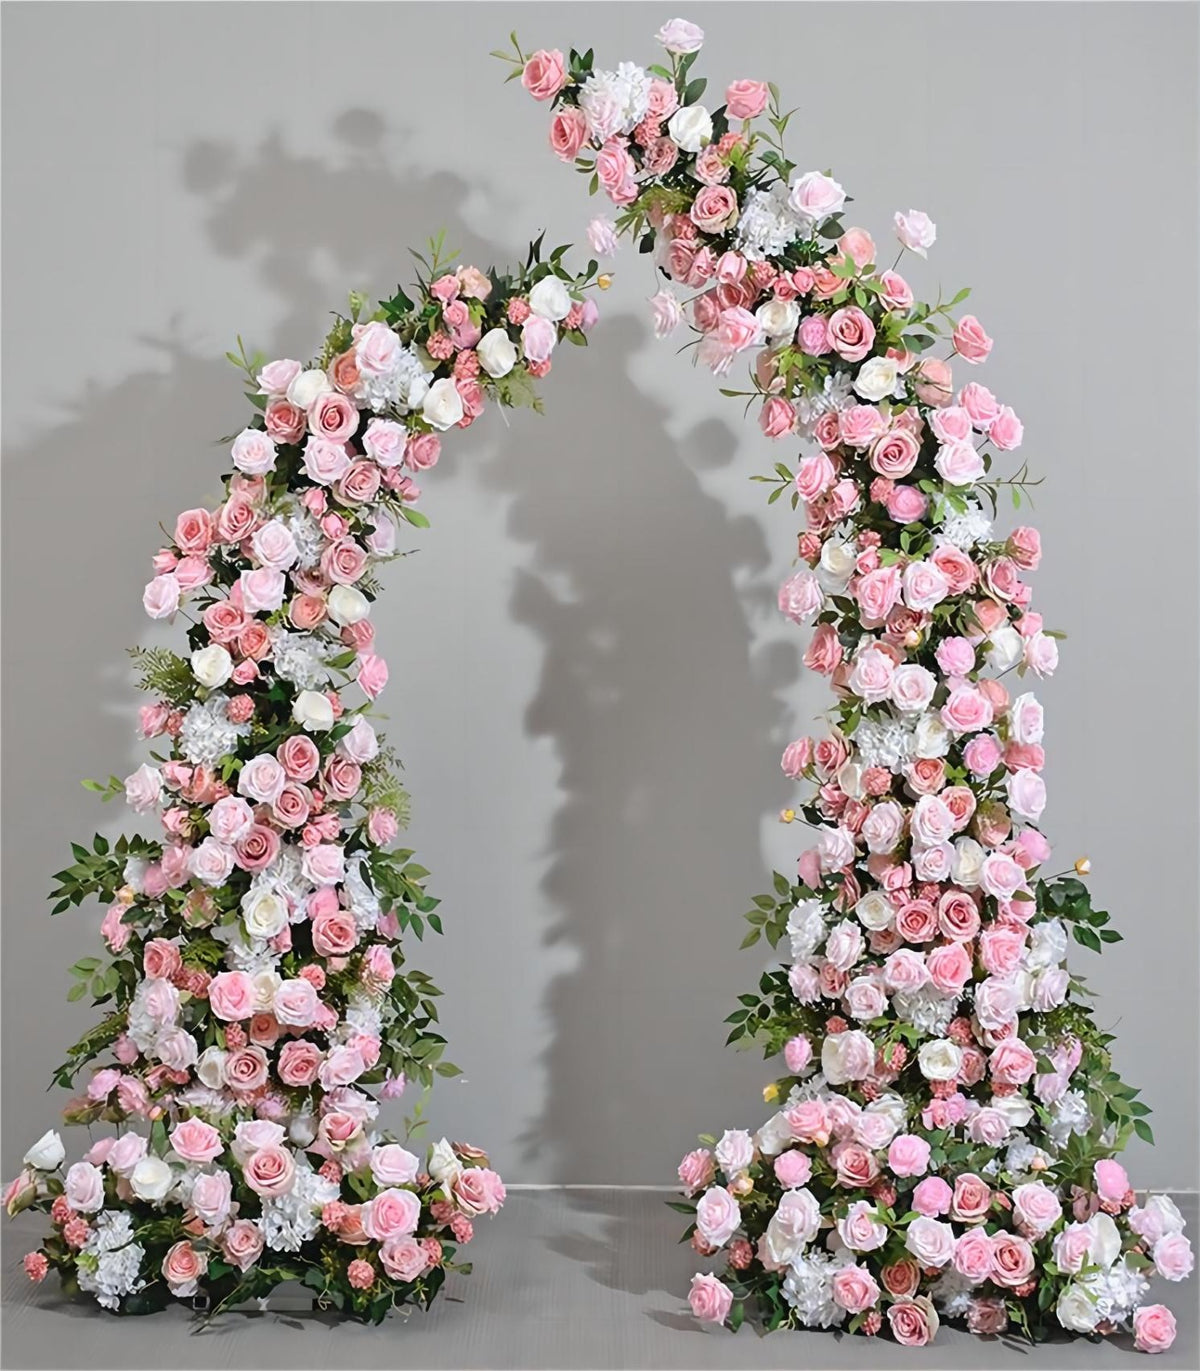 Horn Arch White Pink Hydrangea Rose Artificial Flower Wedding Party Birthday Backdrop Decor CH9686-5